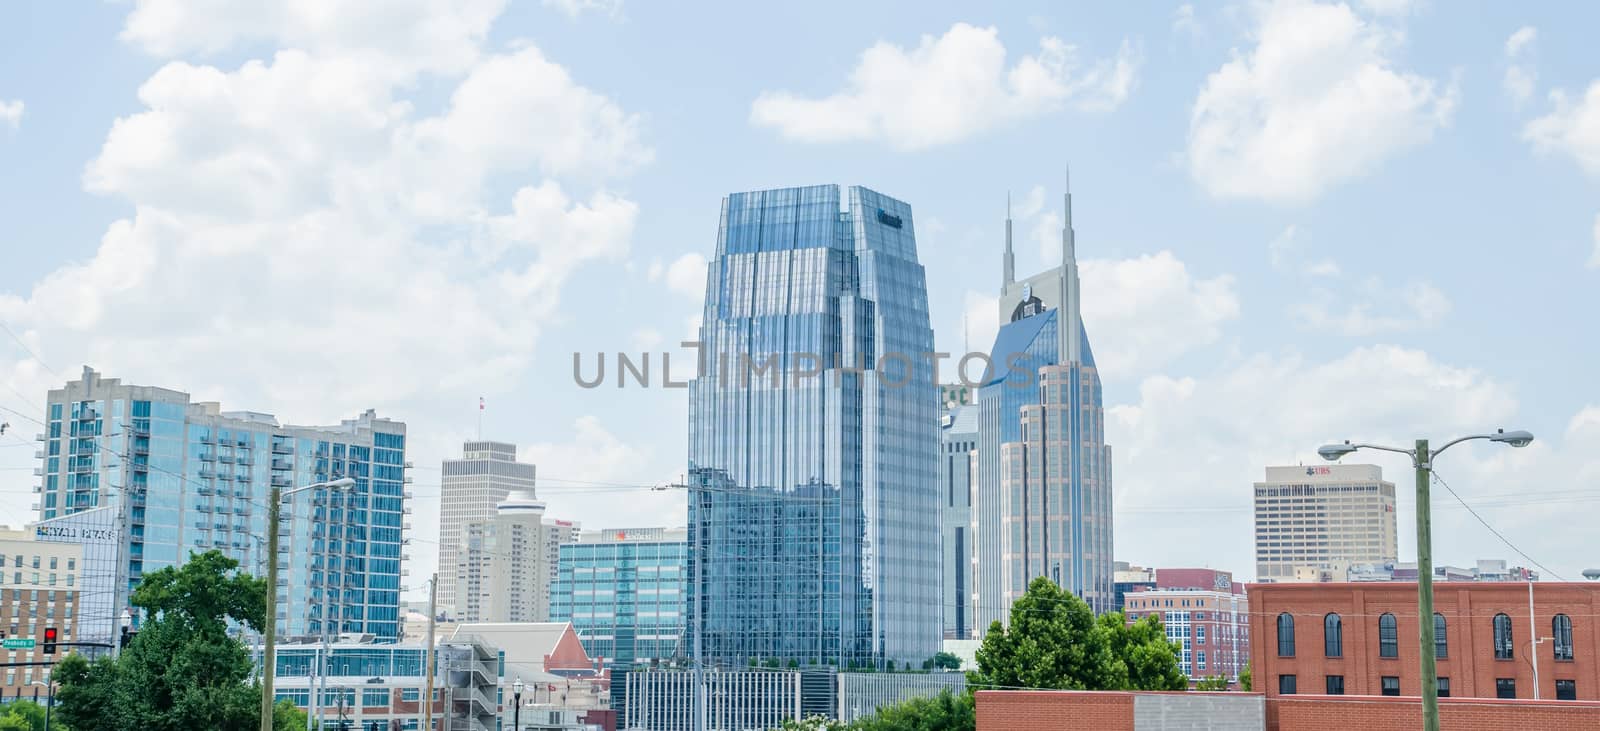 Nashville, Tennessee downtown skyline and streets by digidreamgrafix